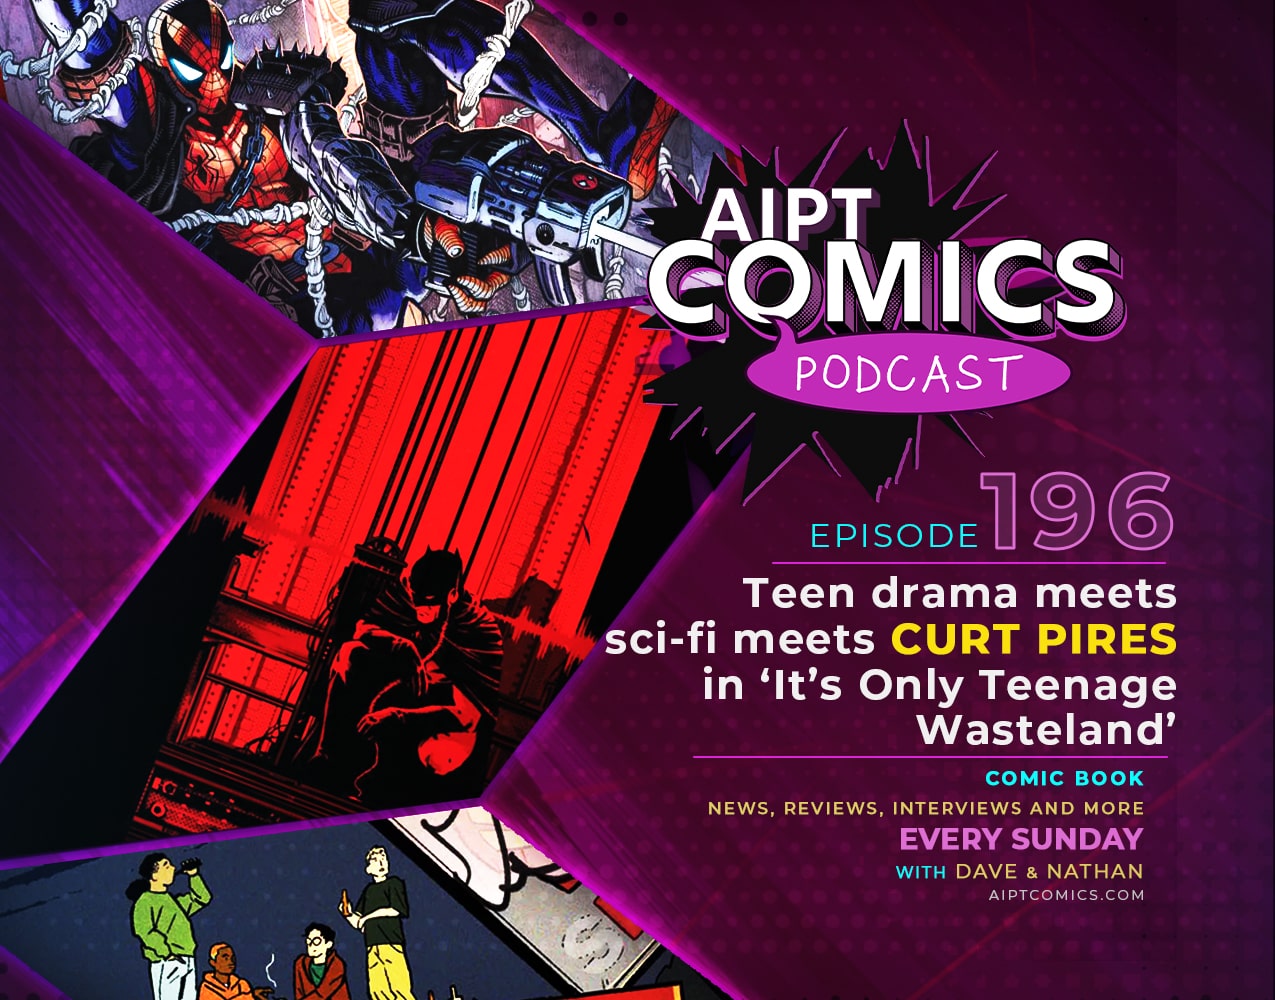 AIPT Comics Podcast Episode 196: Teen drama meets sci-fi meets Curt Pires in ‘It’s Only Teenage Wasteland’